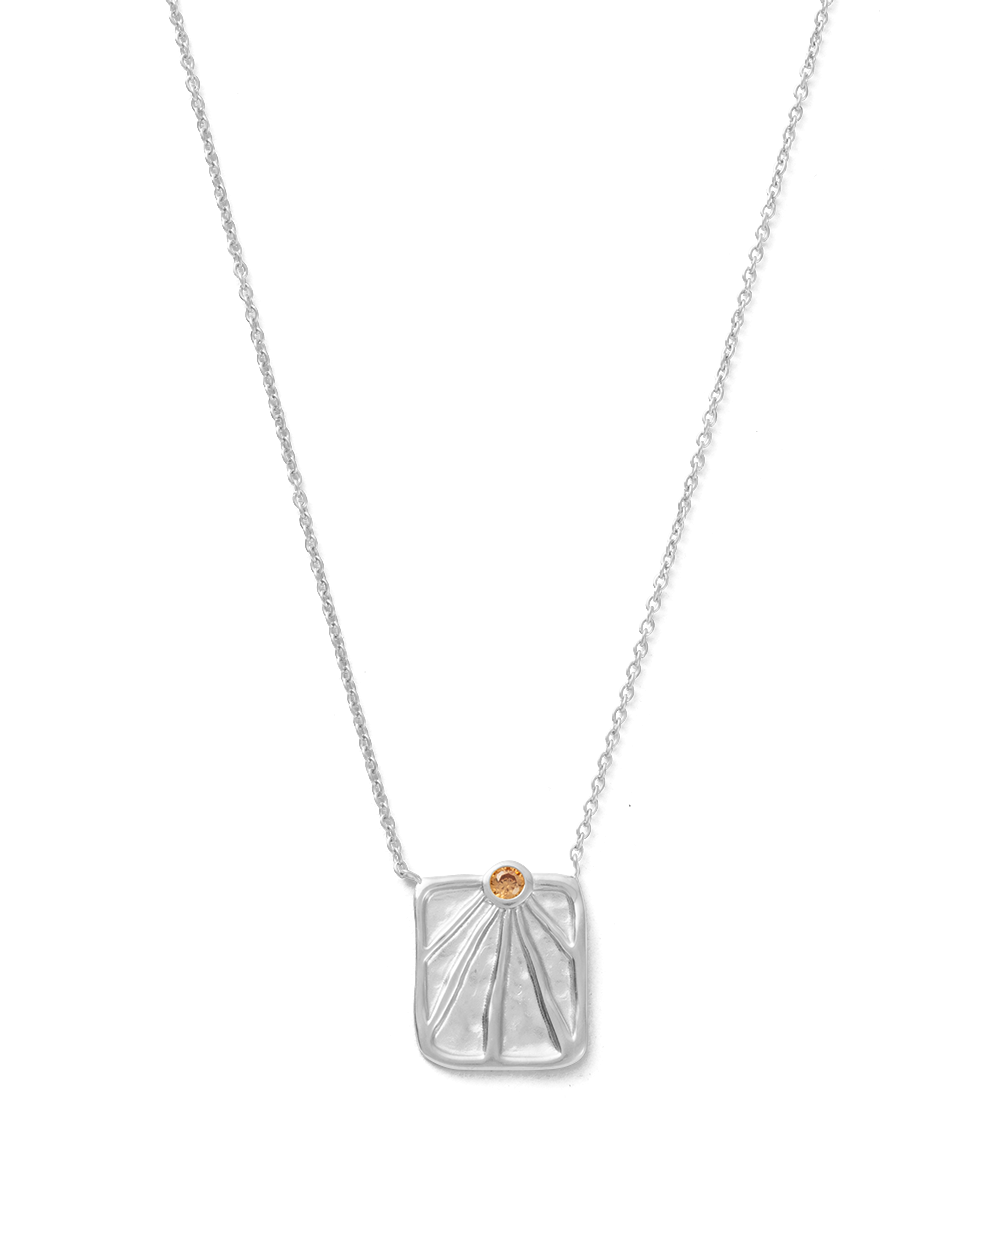 FOLLOW THE SUN COIN NECKLACE (STERLING SILVER)